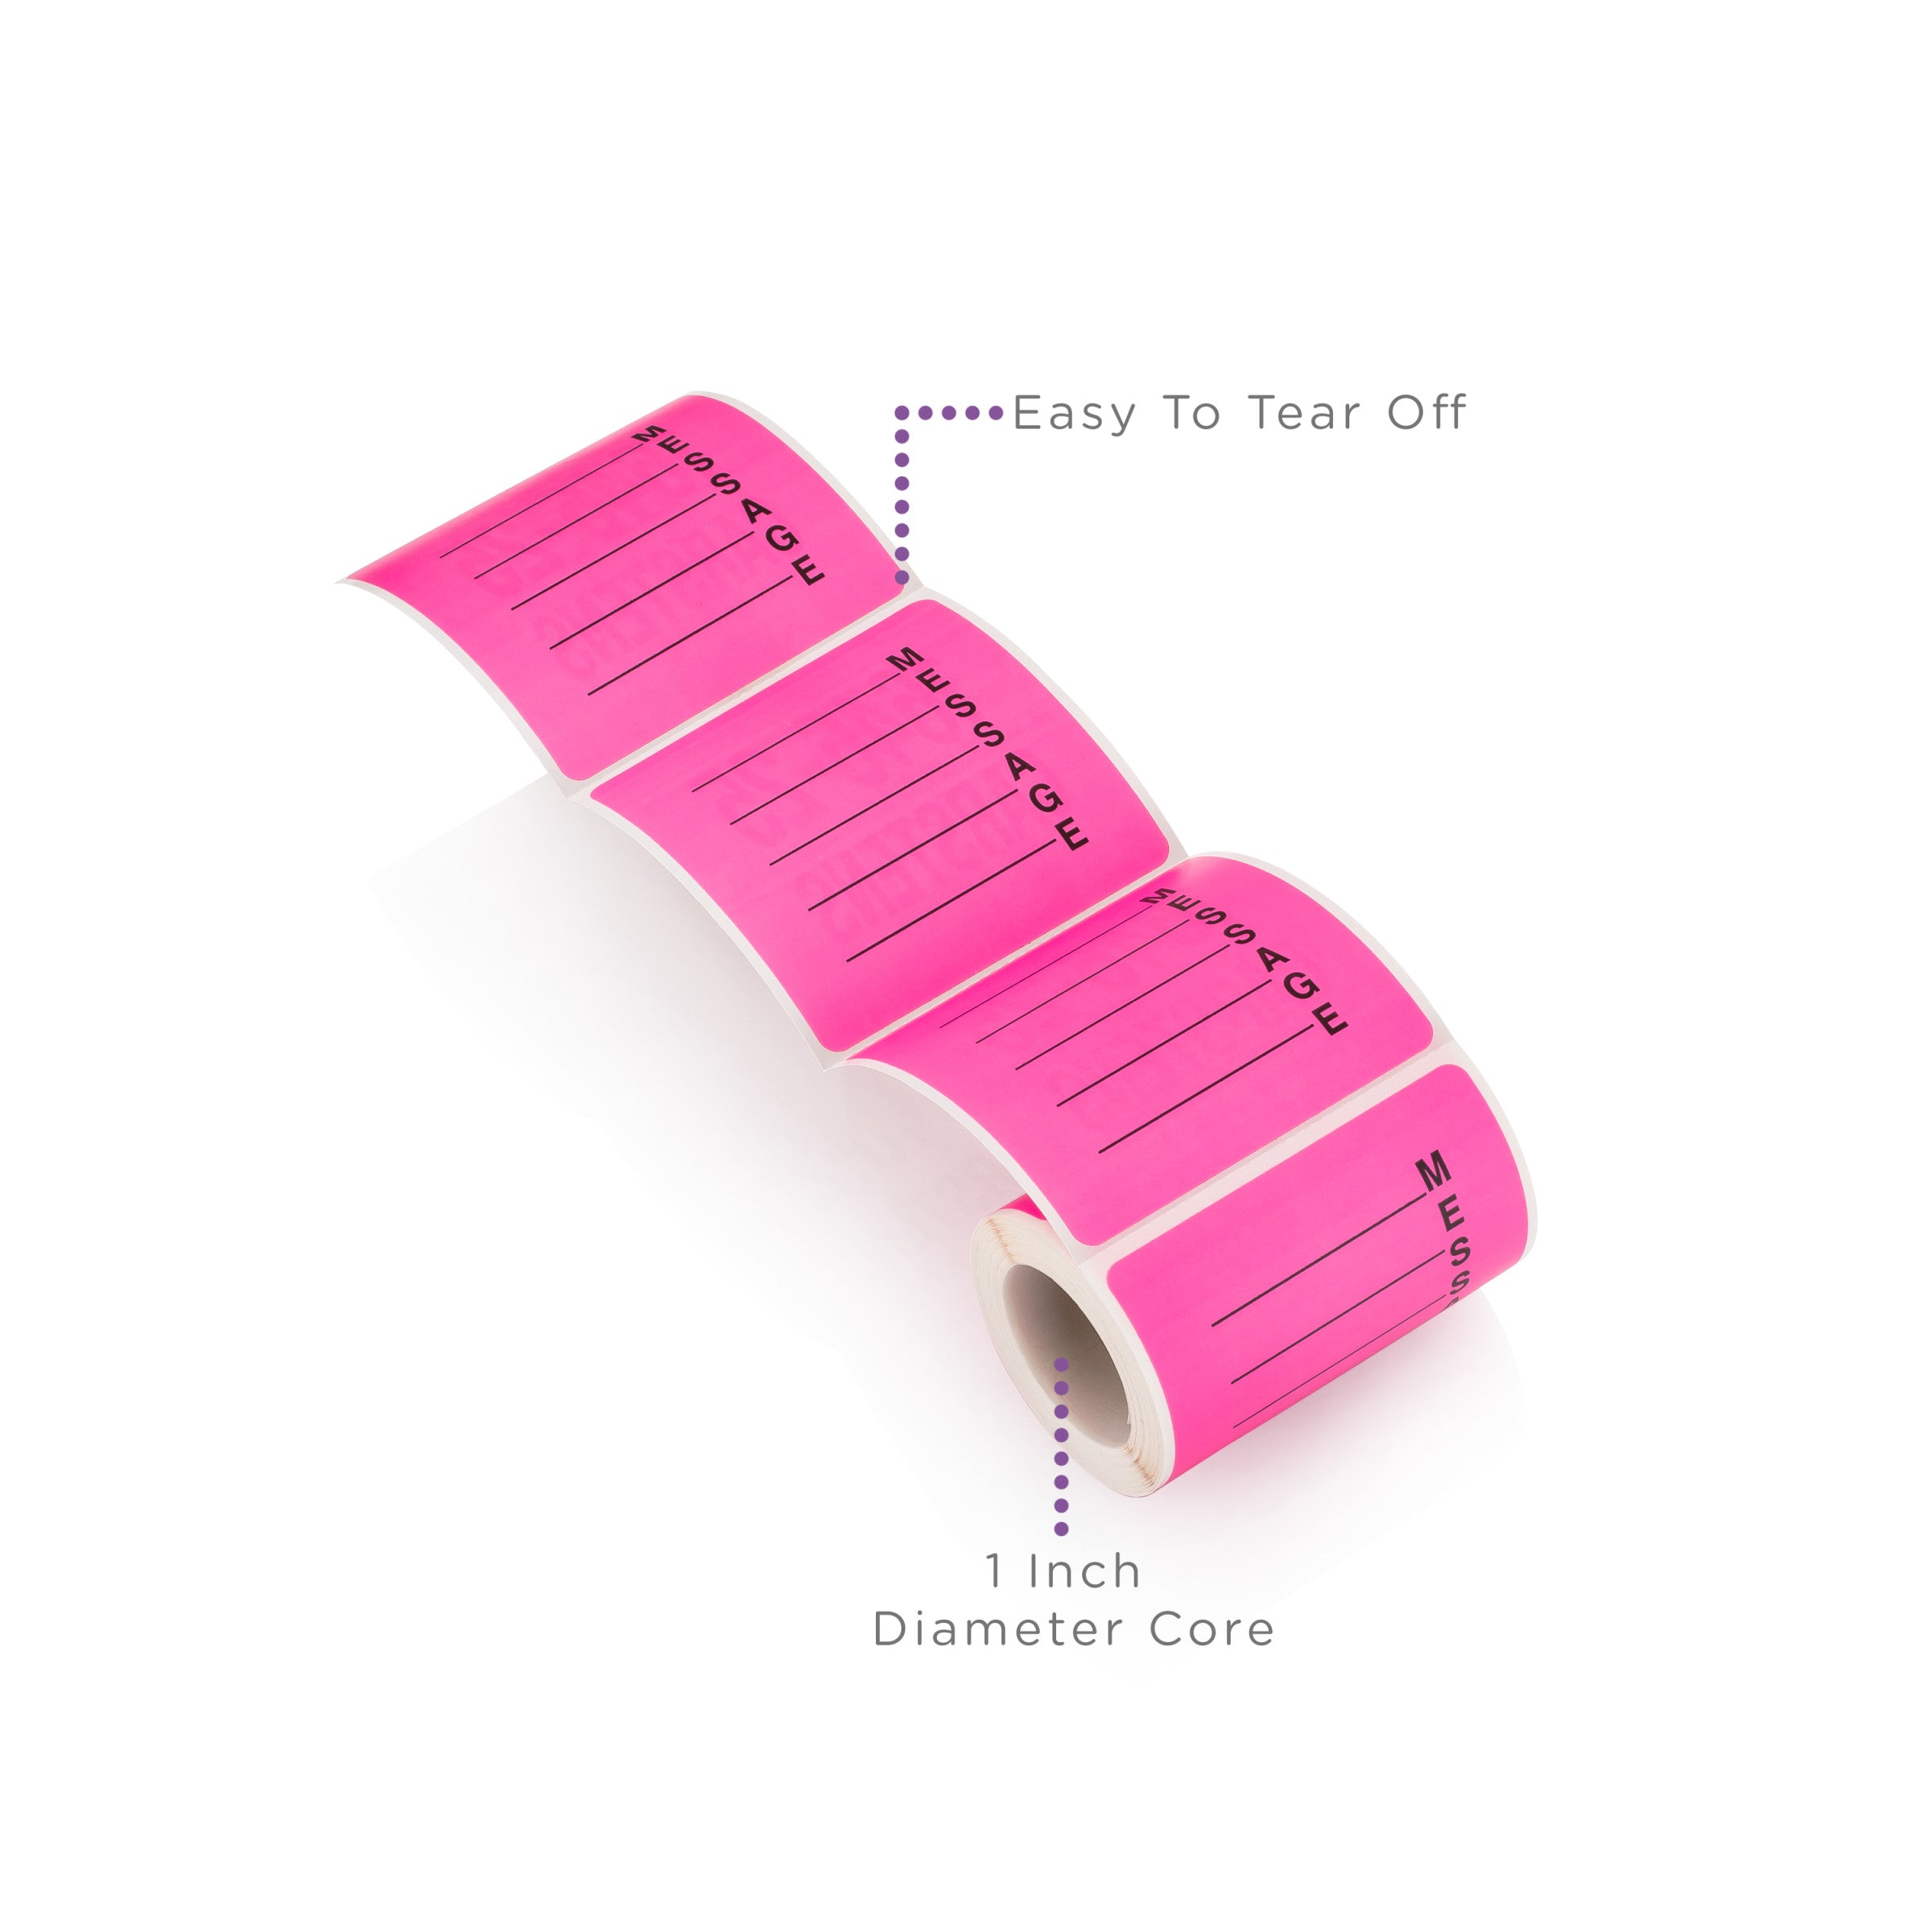 Message Alert and Instruction Labels, Pink, W2.5" x H.2.5" (Roll of 100)